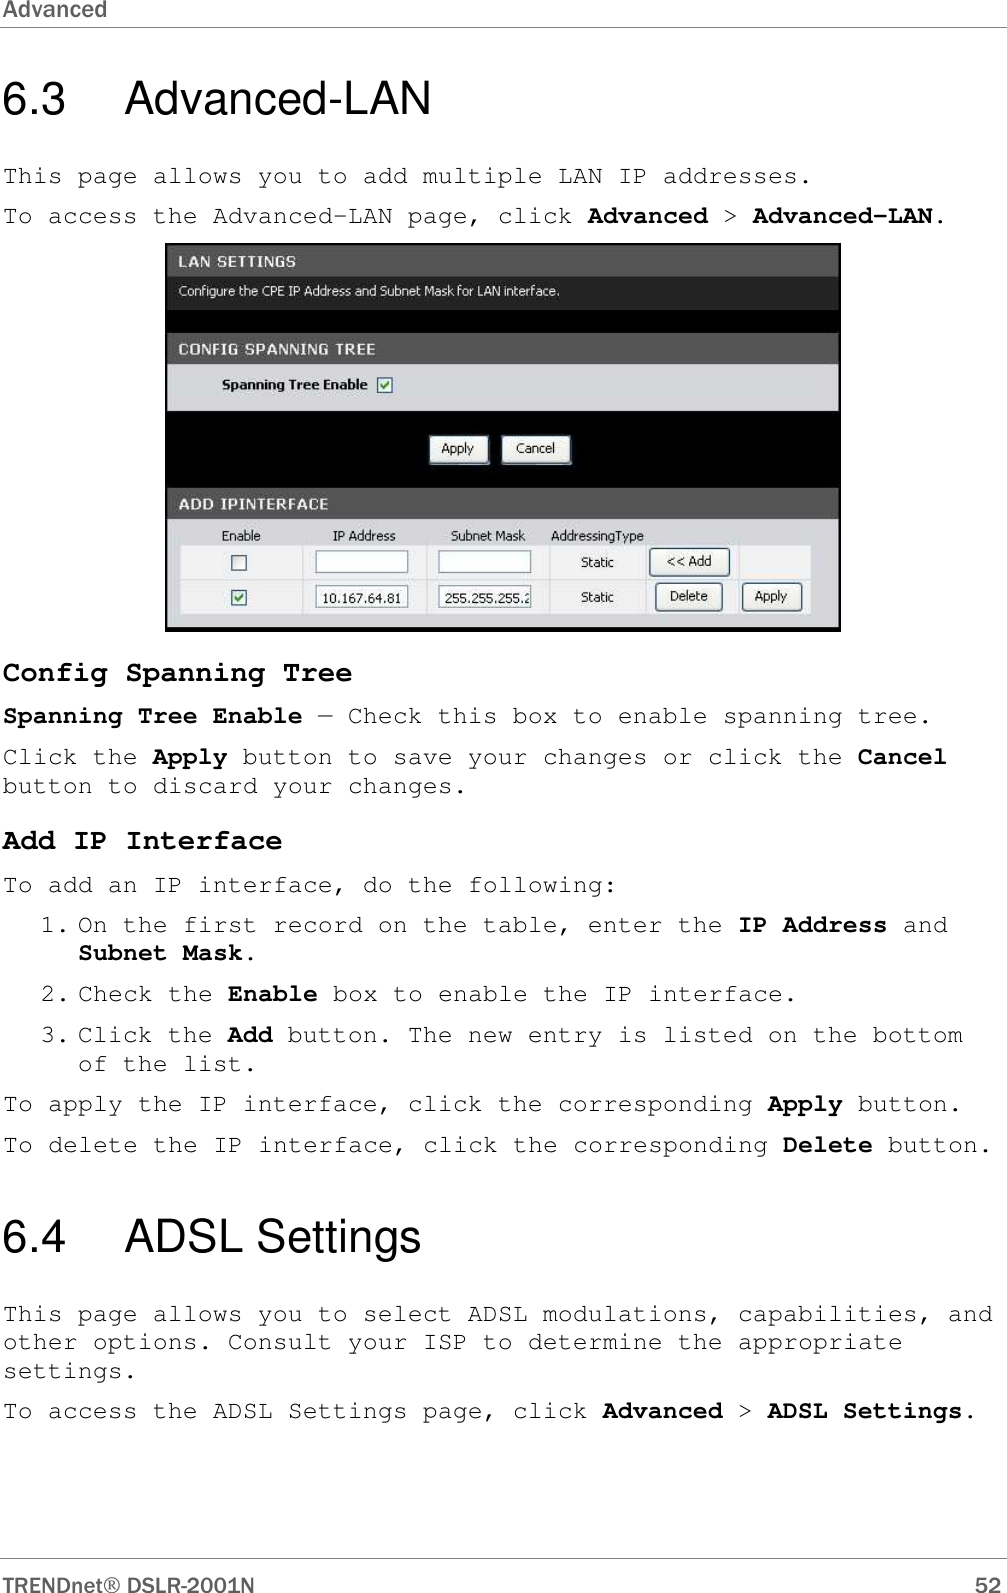 Advanced      TRENDnet DSLR-2001N        52 6.3   Advanced-LAN This page allows you to add multiple LAN IP addresses. To access the Advanced-LAN page, click Advanced &gt; Advanced-LAN.  Config Spanning Tree Spanning Tree Enable — Check this box to enable spanning tree. Click the Apply button to save your changes or click the Cancel button to discard your changes. Add IP Interface To add an IP interface, do the following: 1. On the first record on the table, enter the IP Address and Subnet Mask. 2. Check the Enable box to enable the IP interface. 3. Click the Add button. The new entry is listed on the bottom of the list. To apply the IP interface, click the corresponding Apply button. To delete the IP interface, click the corresponding Delete button. 6.4   ADSL Settings This page allows you to select ADSL modulations, capabilities, and other options. Consult your ISP to determine the appropriate settings. To access the ADSL Settings page, click Advanced &gt; ADSL Settings. 